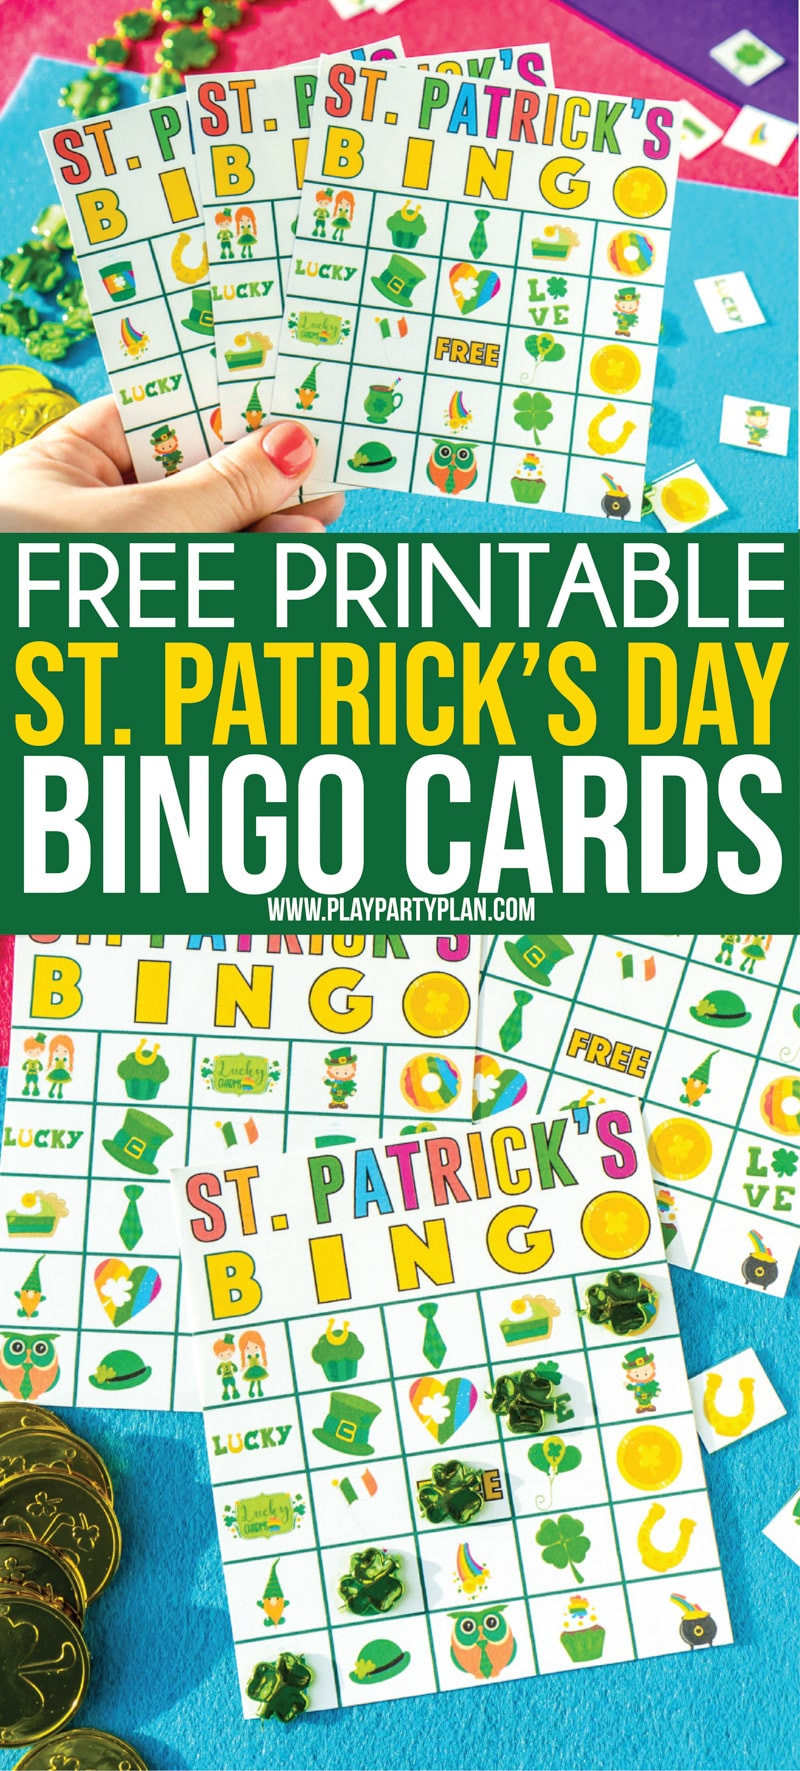 St Patrick's Day Activities For Adults
 Free Printable St Patrick s Day Bingo Cards Play Party Plan